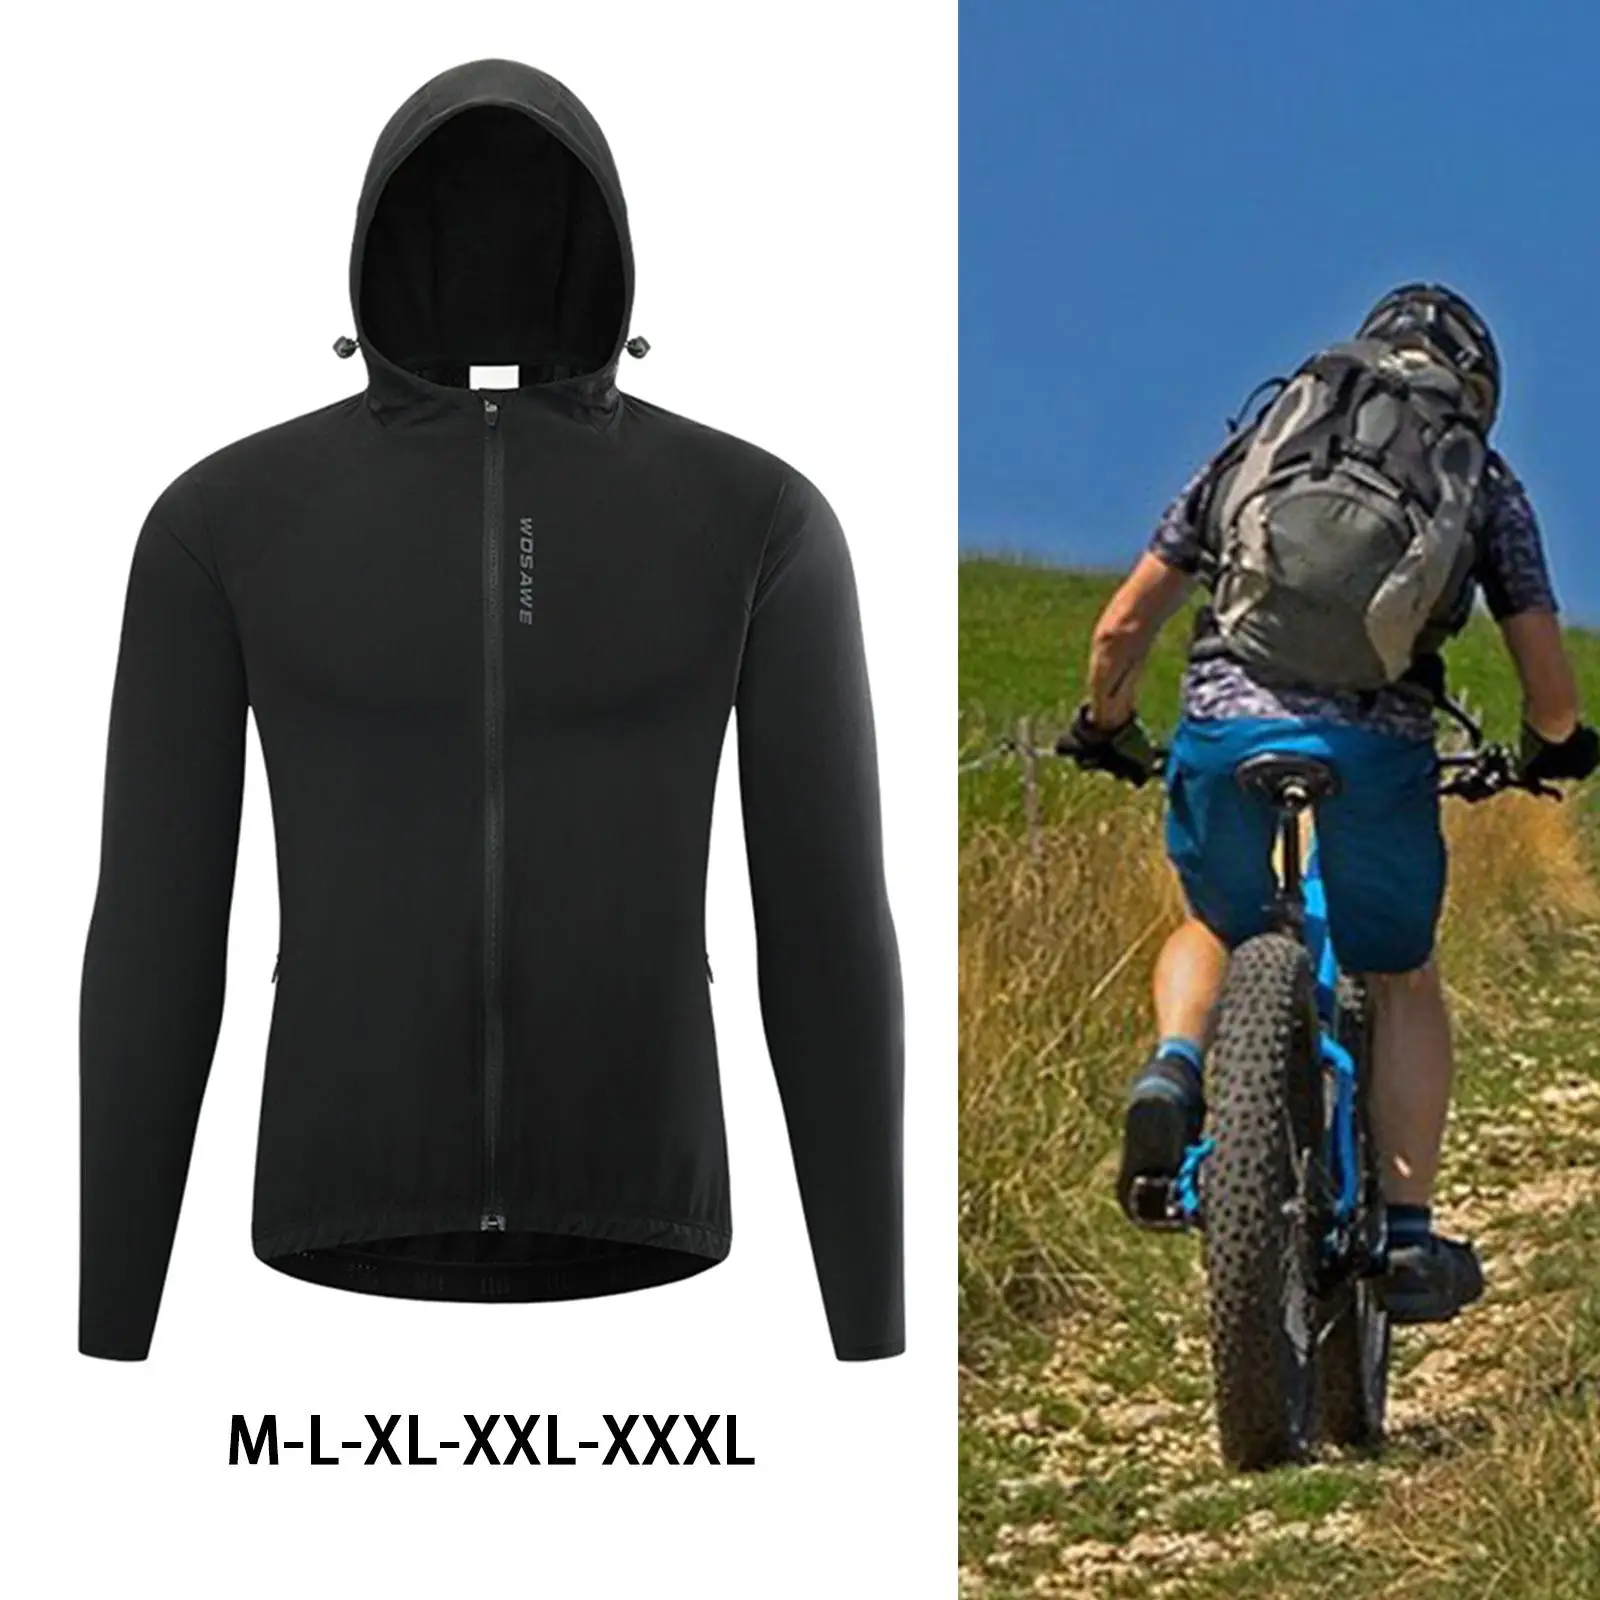 Bike Cycling Jacket for Men Breathable Lightweight Thermal Hooded Coat